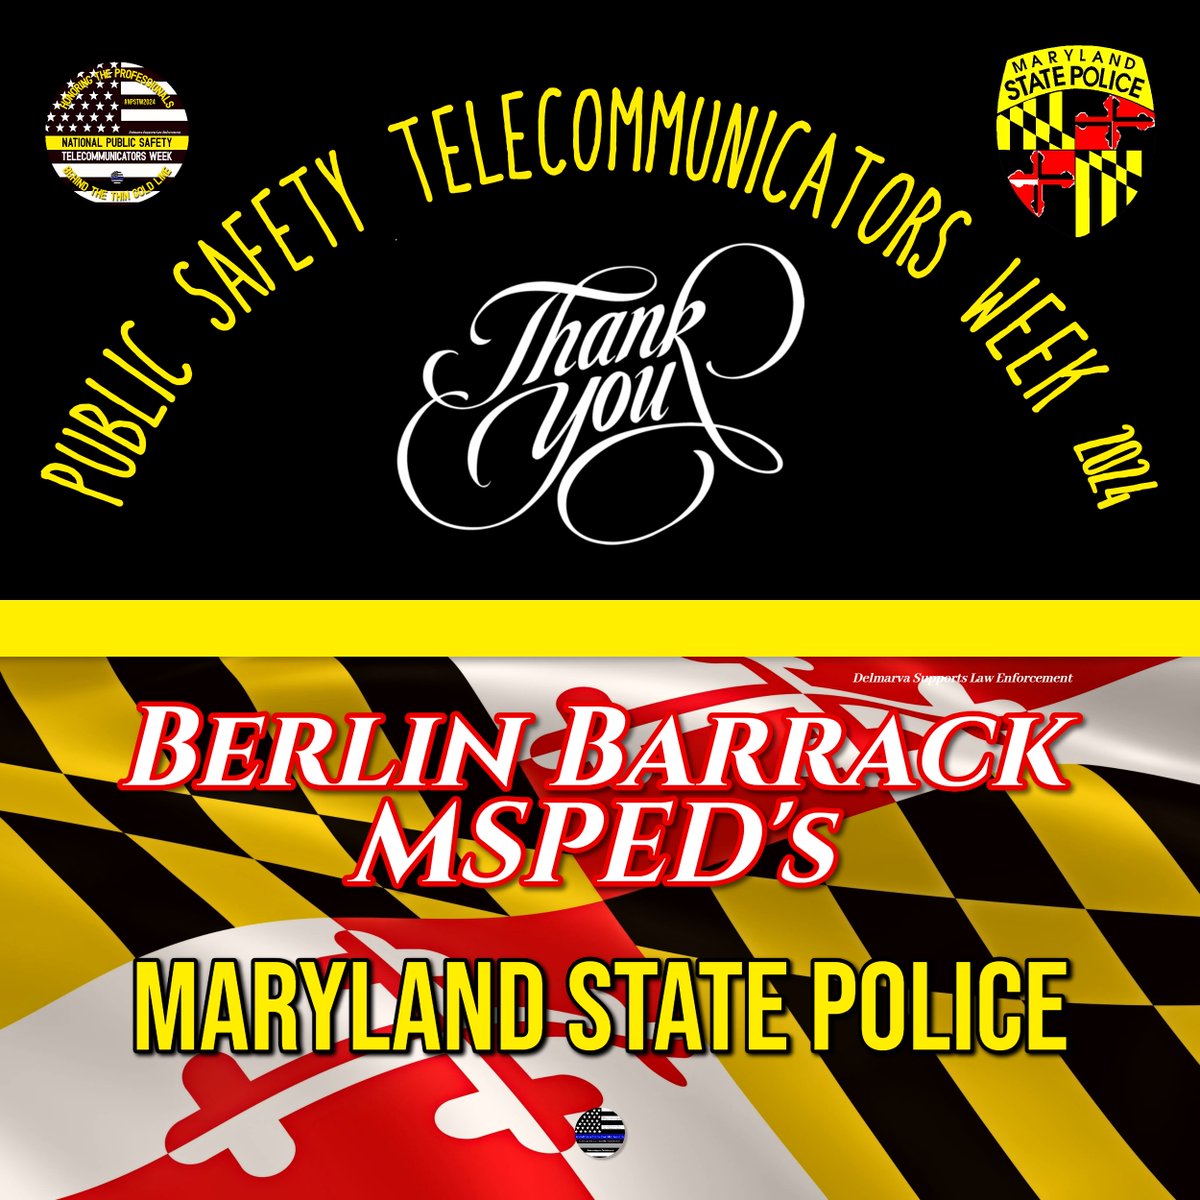 So much love for our dispatcher & telecommunications folks this week! Thank you all! #npstw #thingoldline